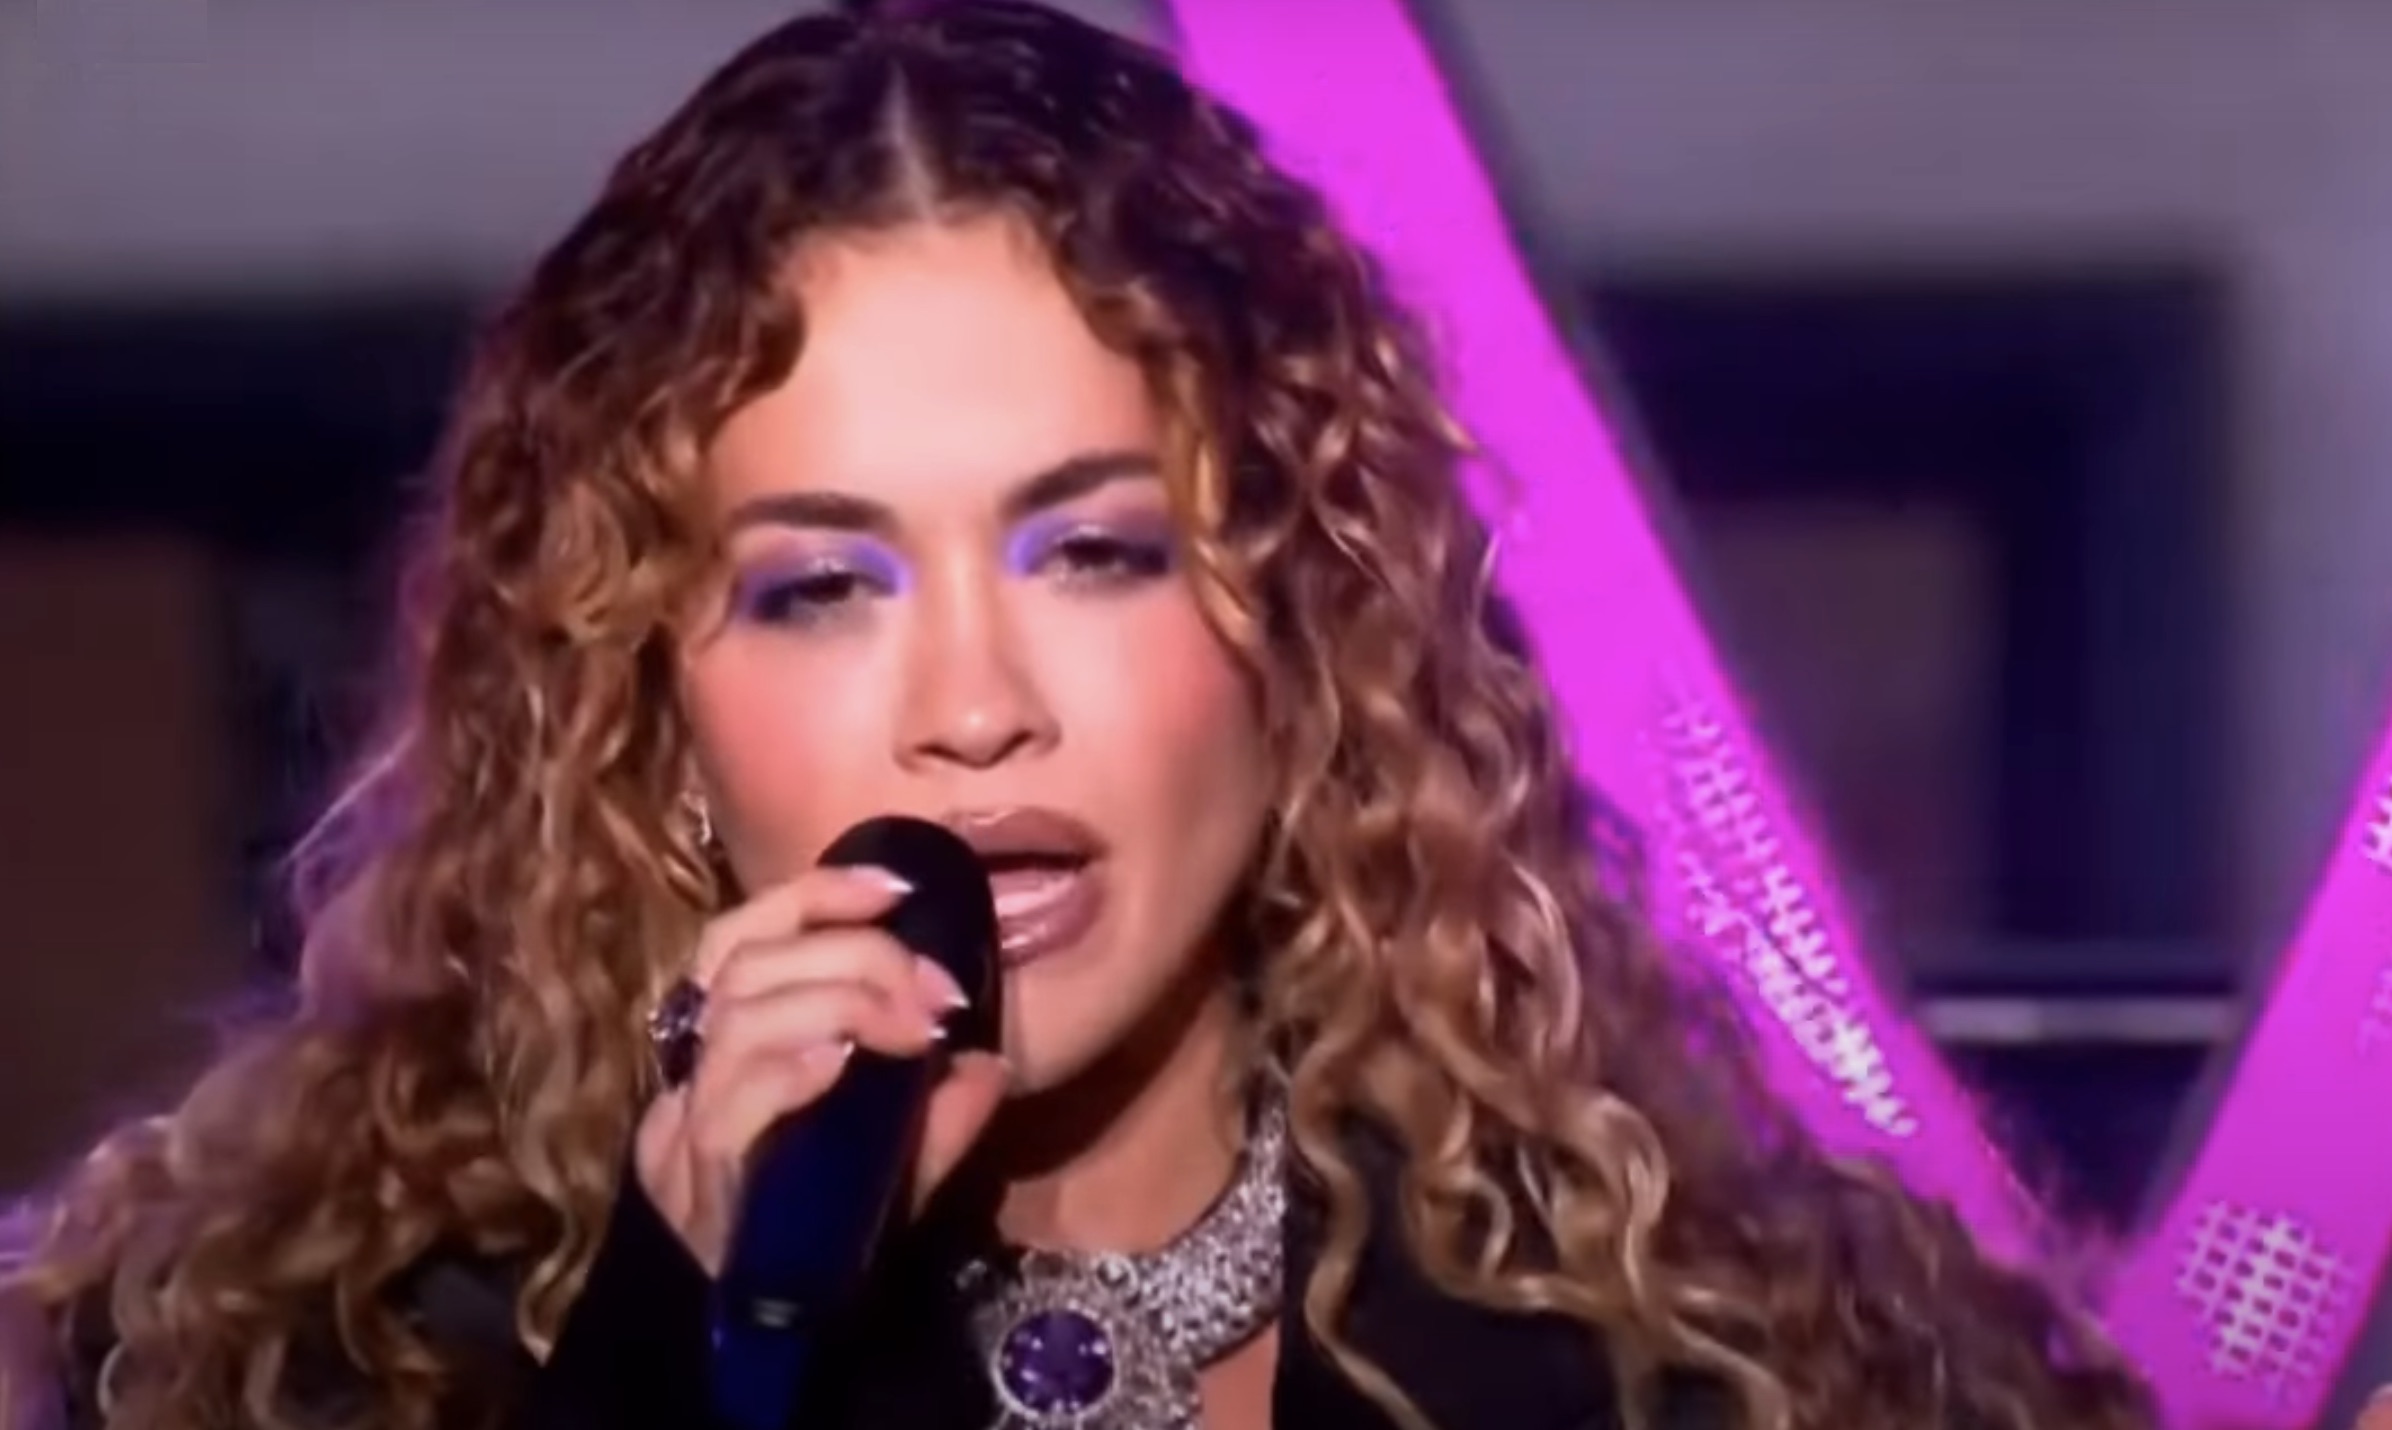 Rita Ora Performs ‘Don’t Think Twice’ on The One Show